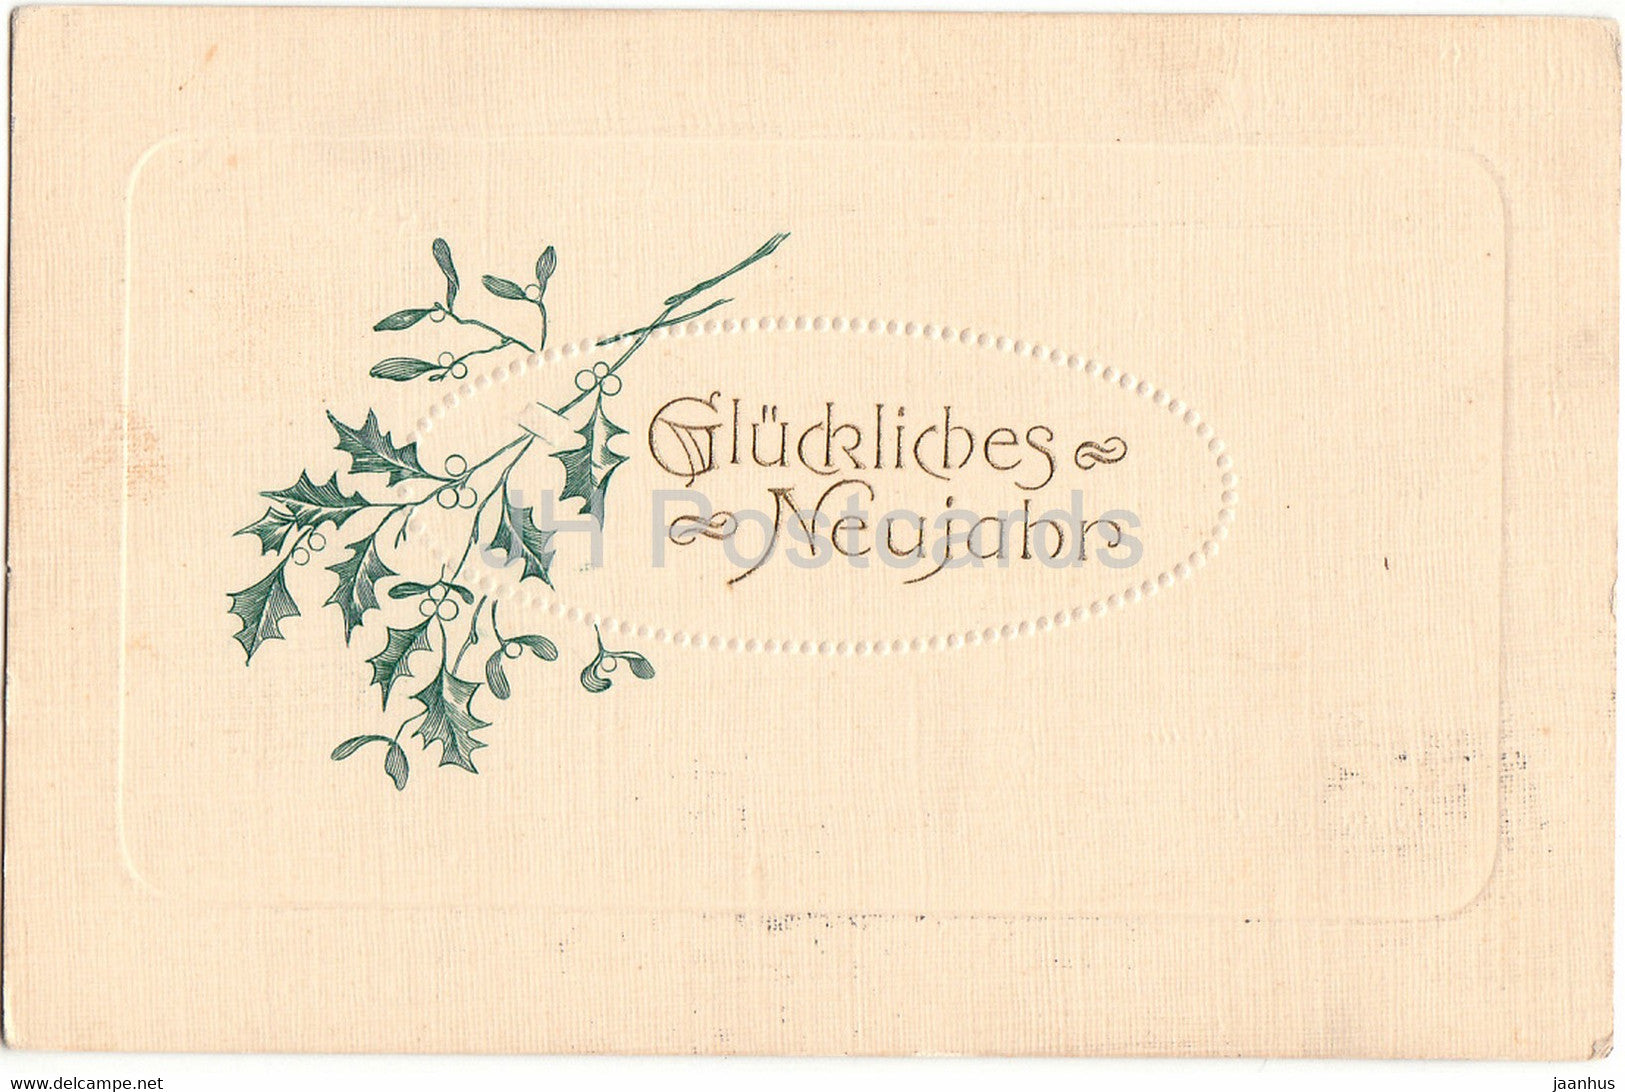 New Year Greeting Card - Gluckliches Neujahr - old postcard - 1911 - Germany - used - JH Postcards